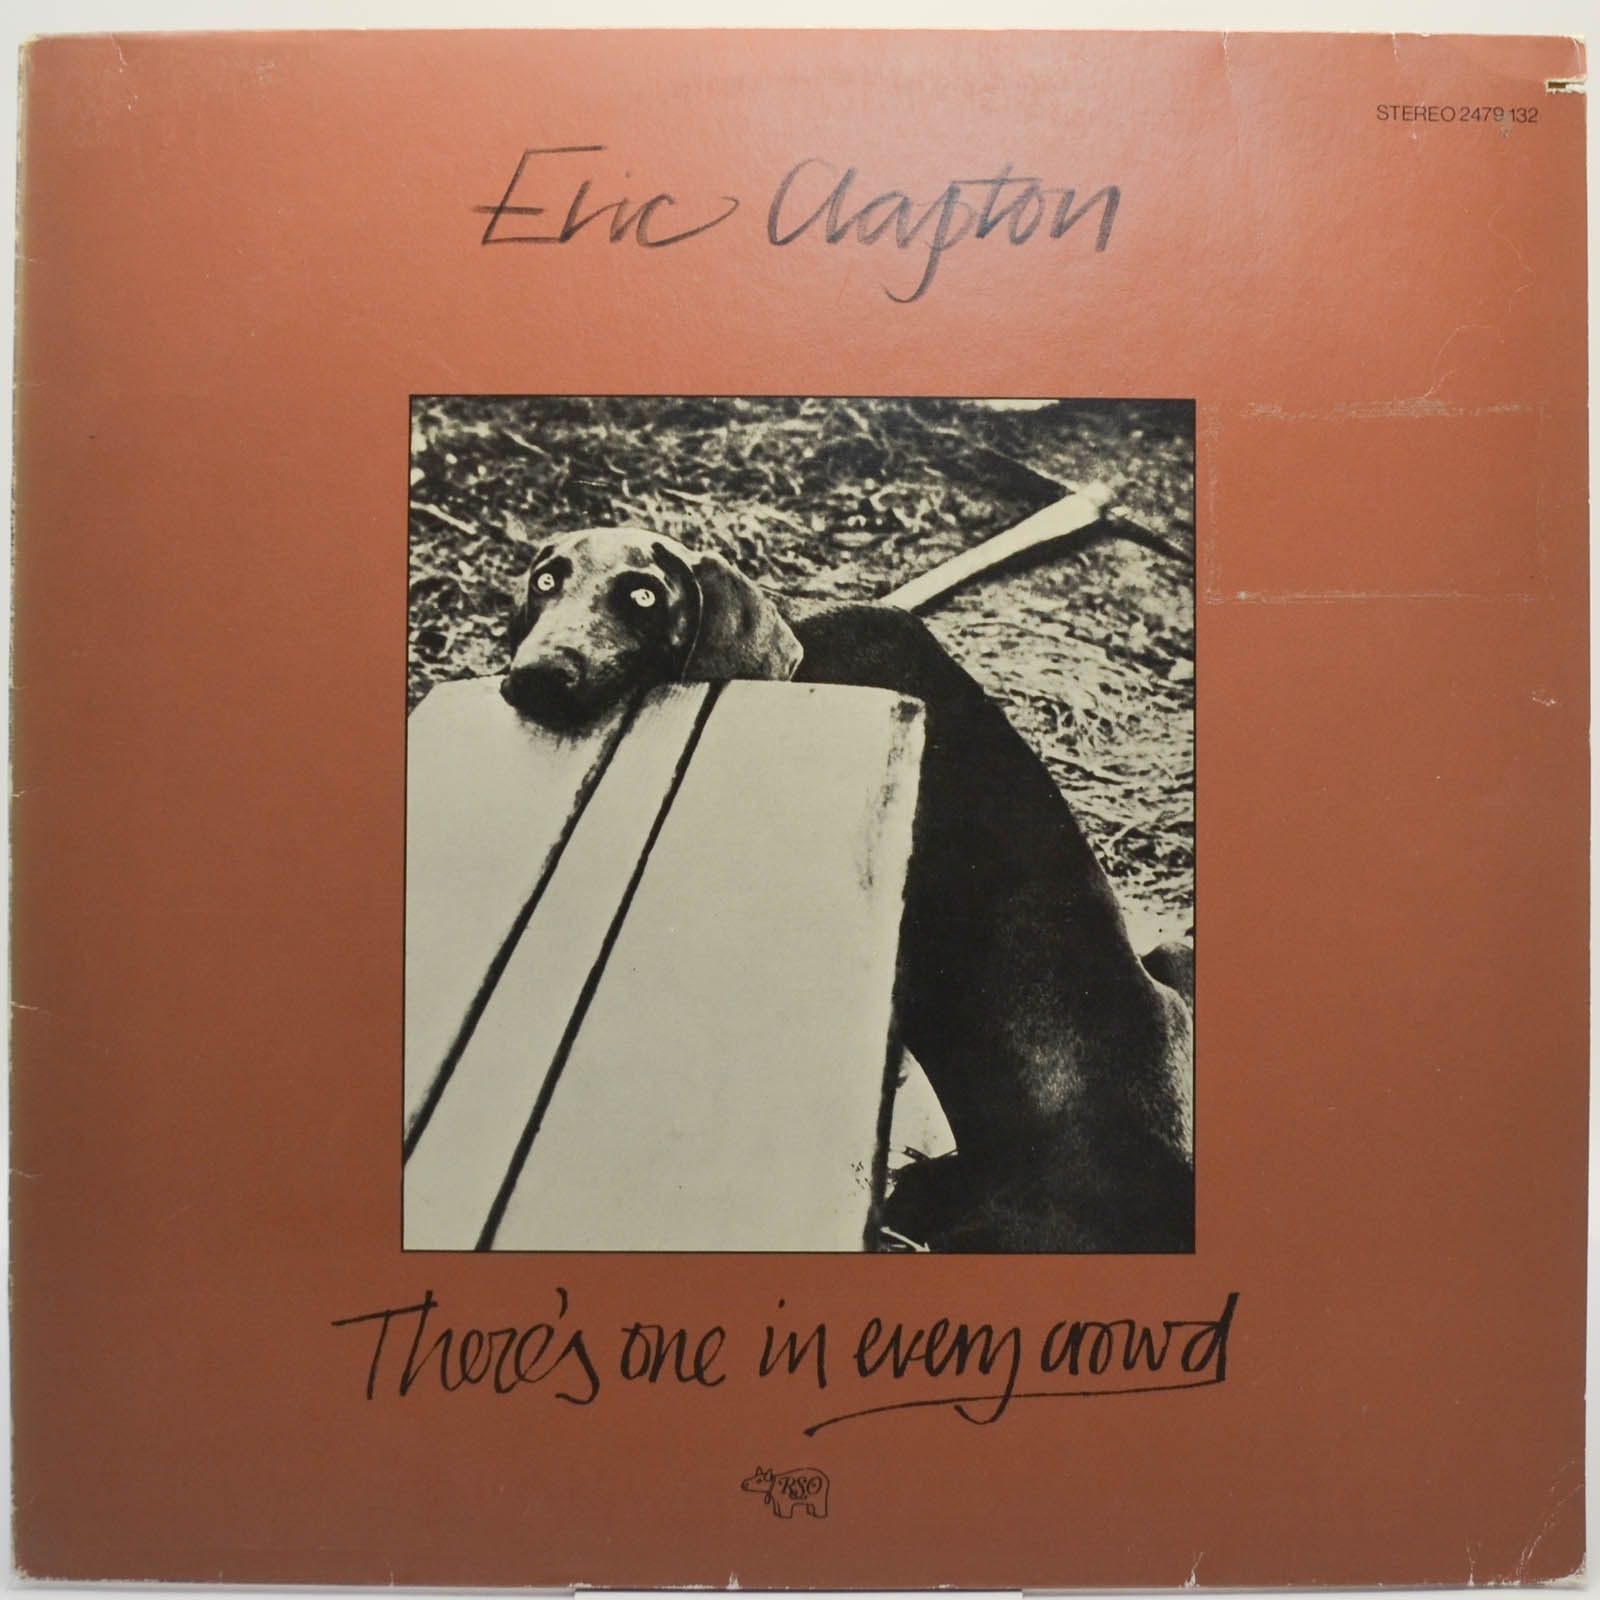 Eric Clapton — There's One In Every Crowd, 1975